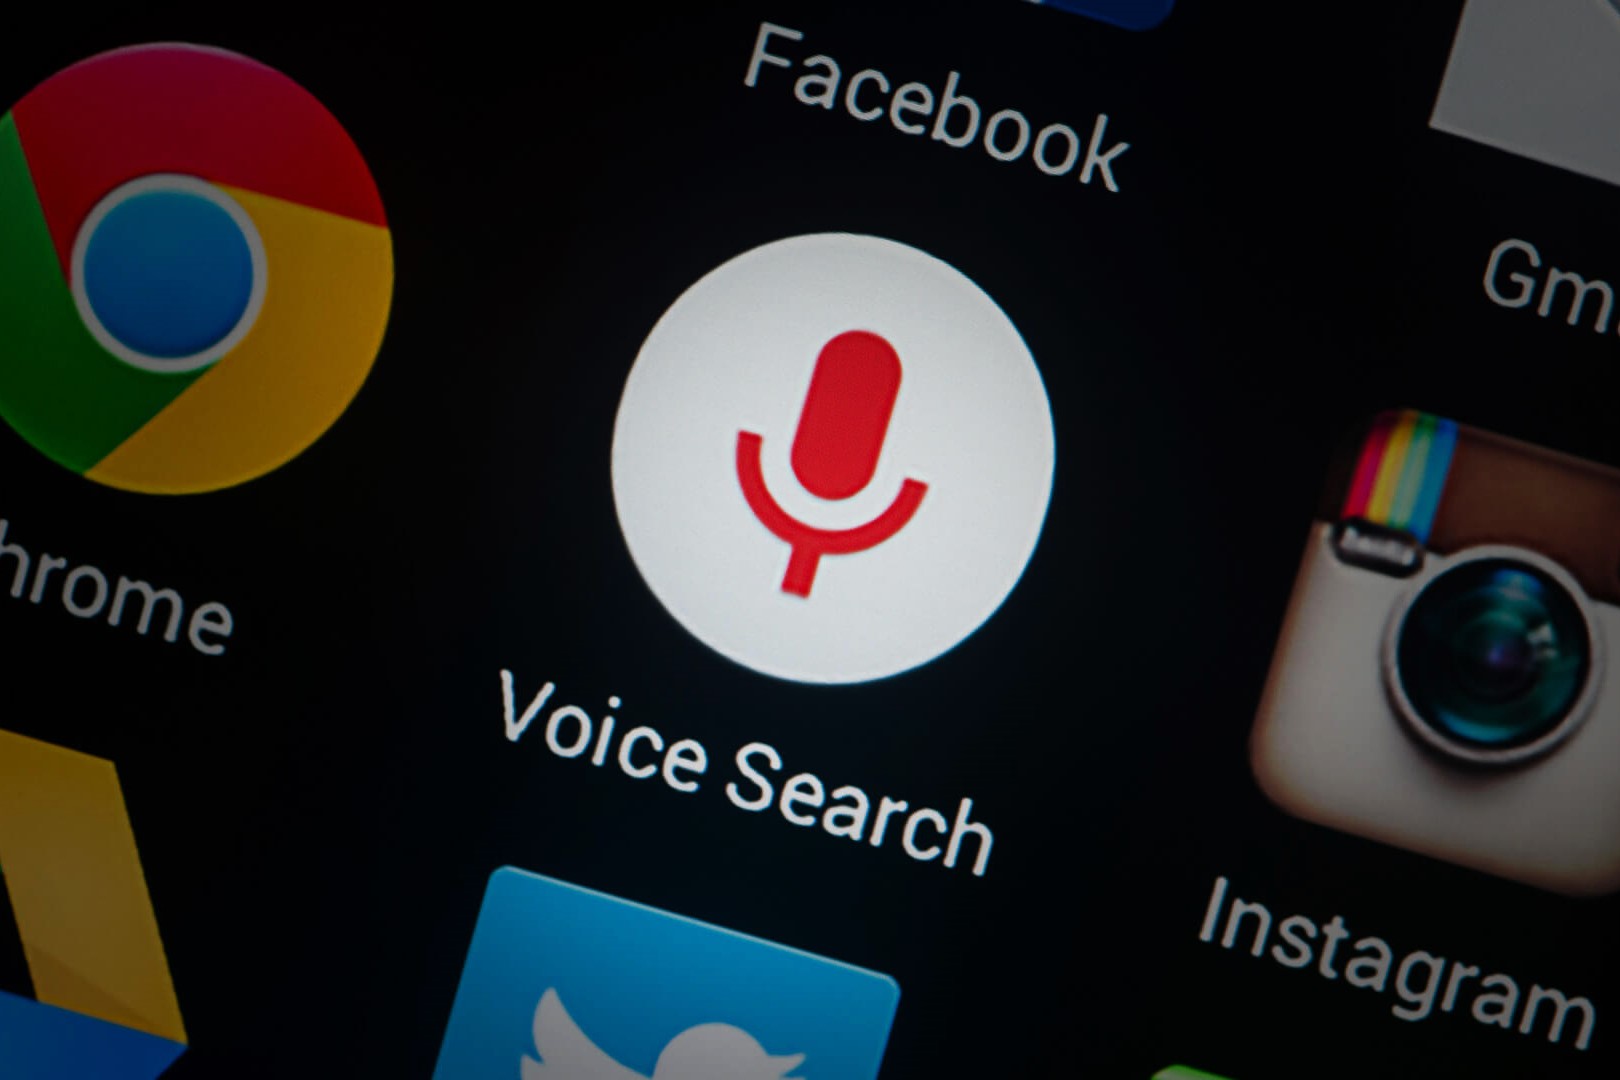 Downloading Google Voice Search To Xiaomi Redmi 3: Step-by-Step Guide